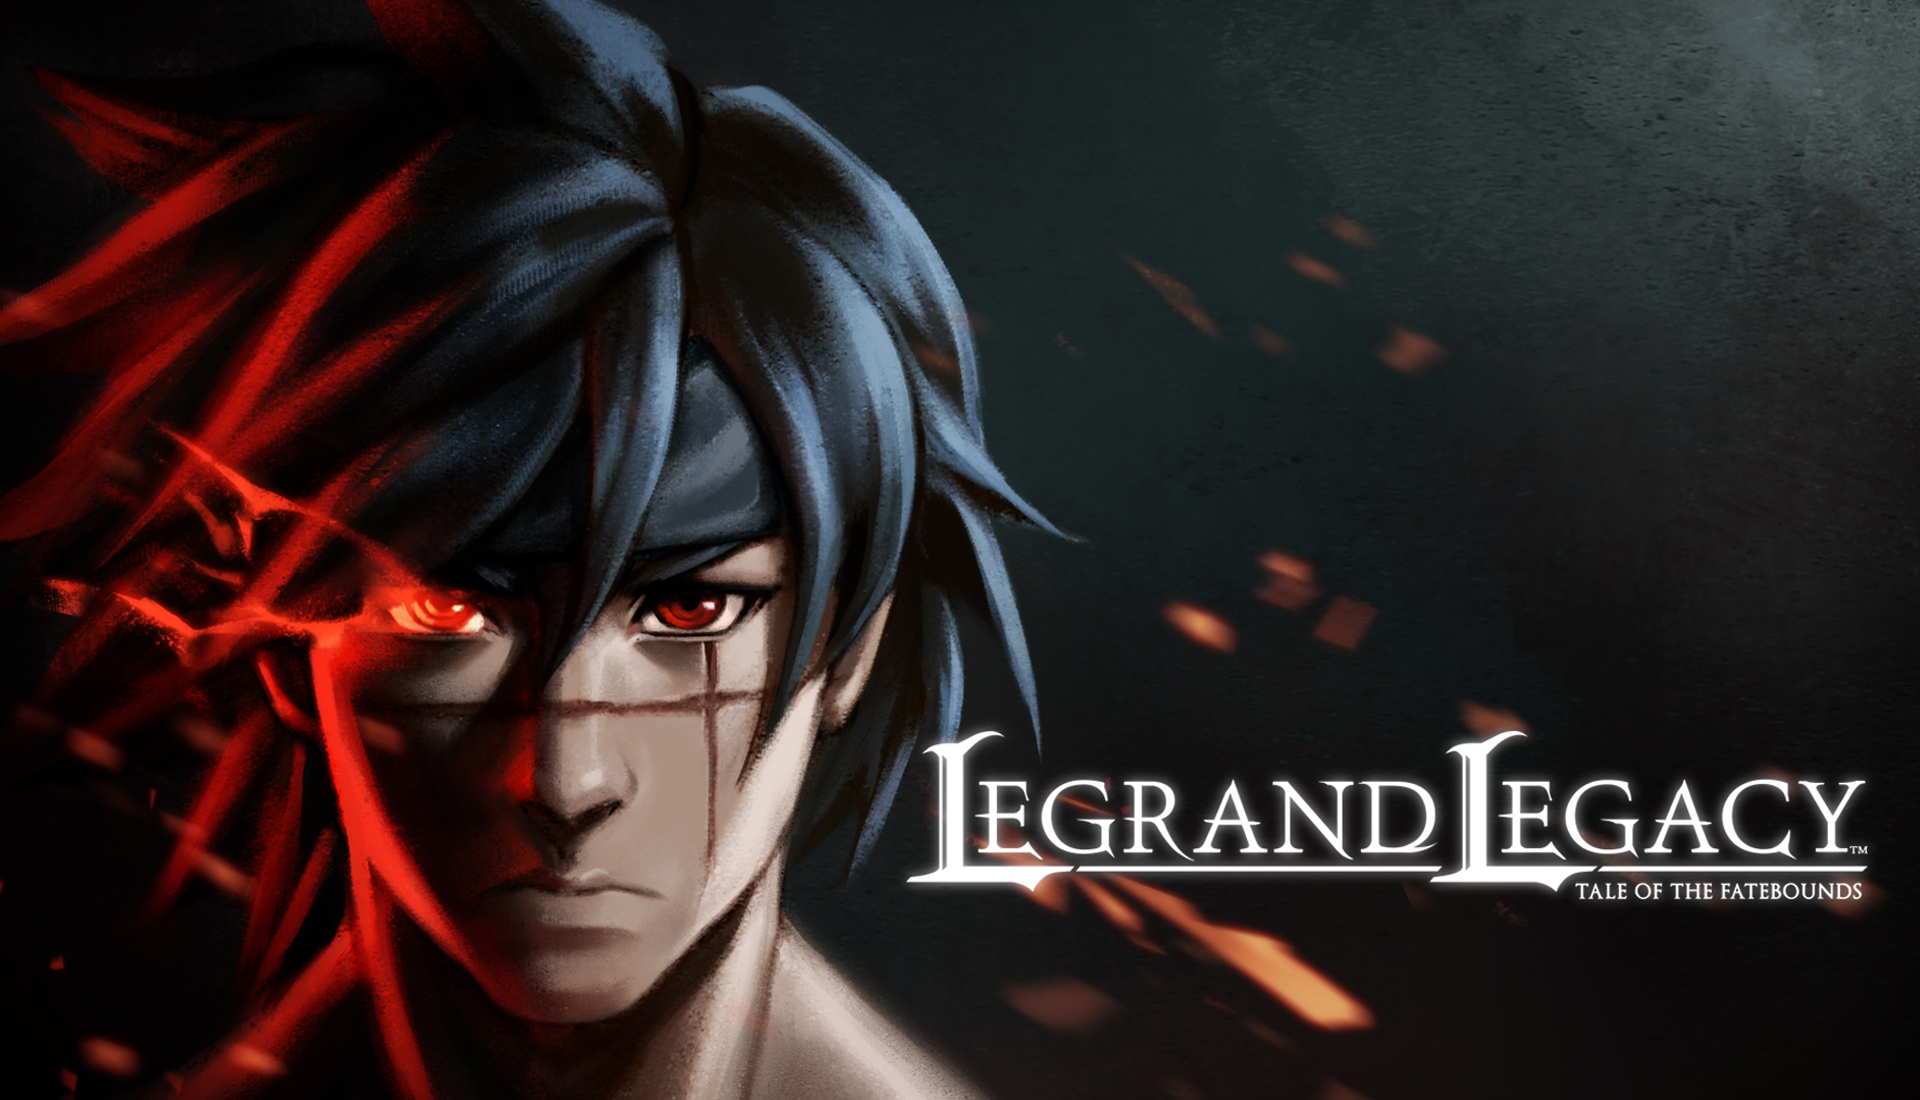 LEGRAND LEGACY - Tale of the Fatebounds